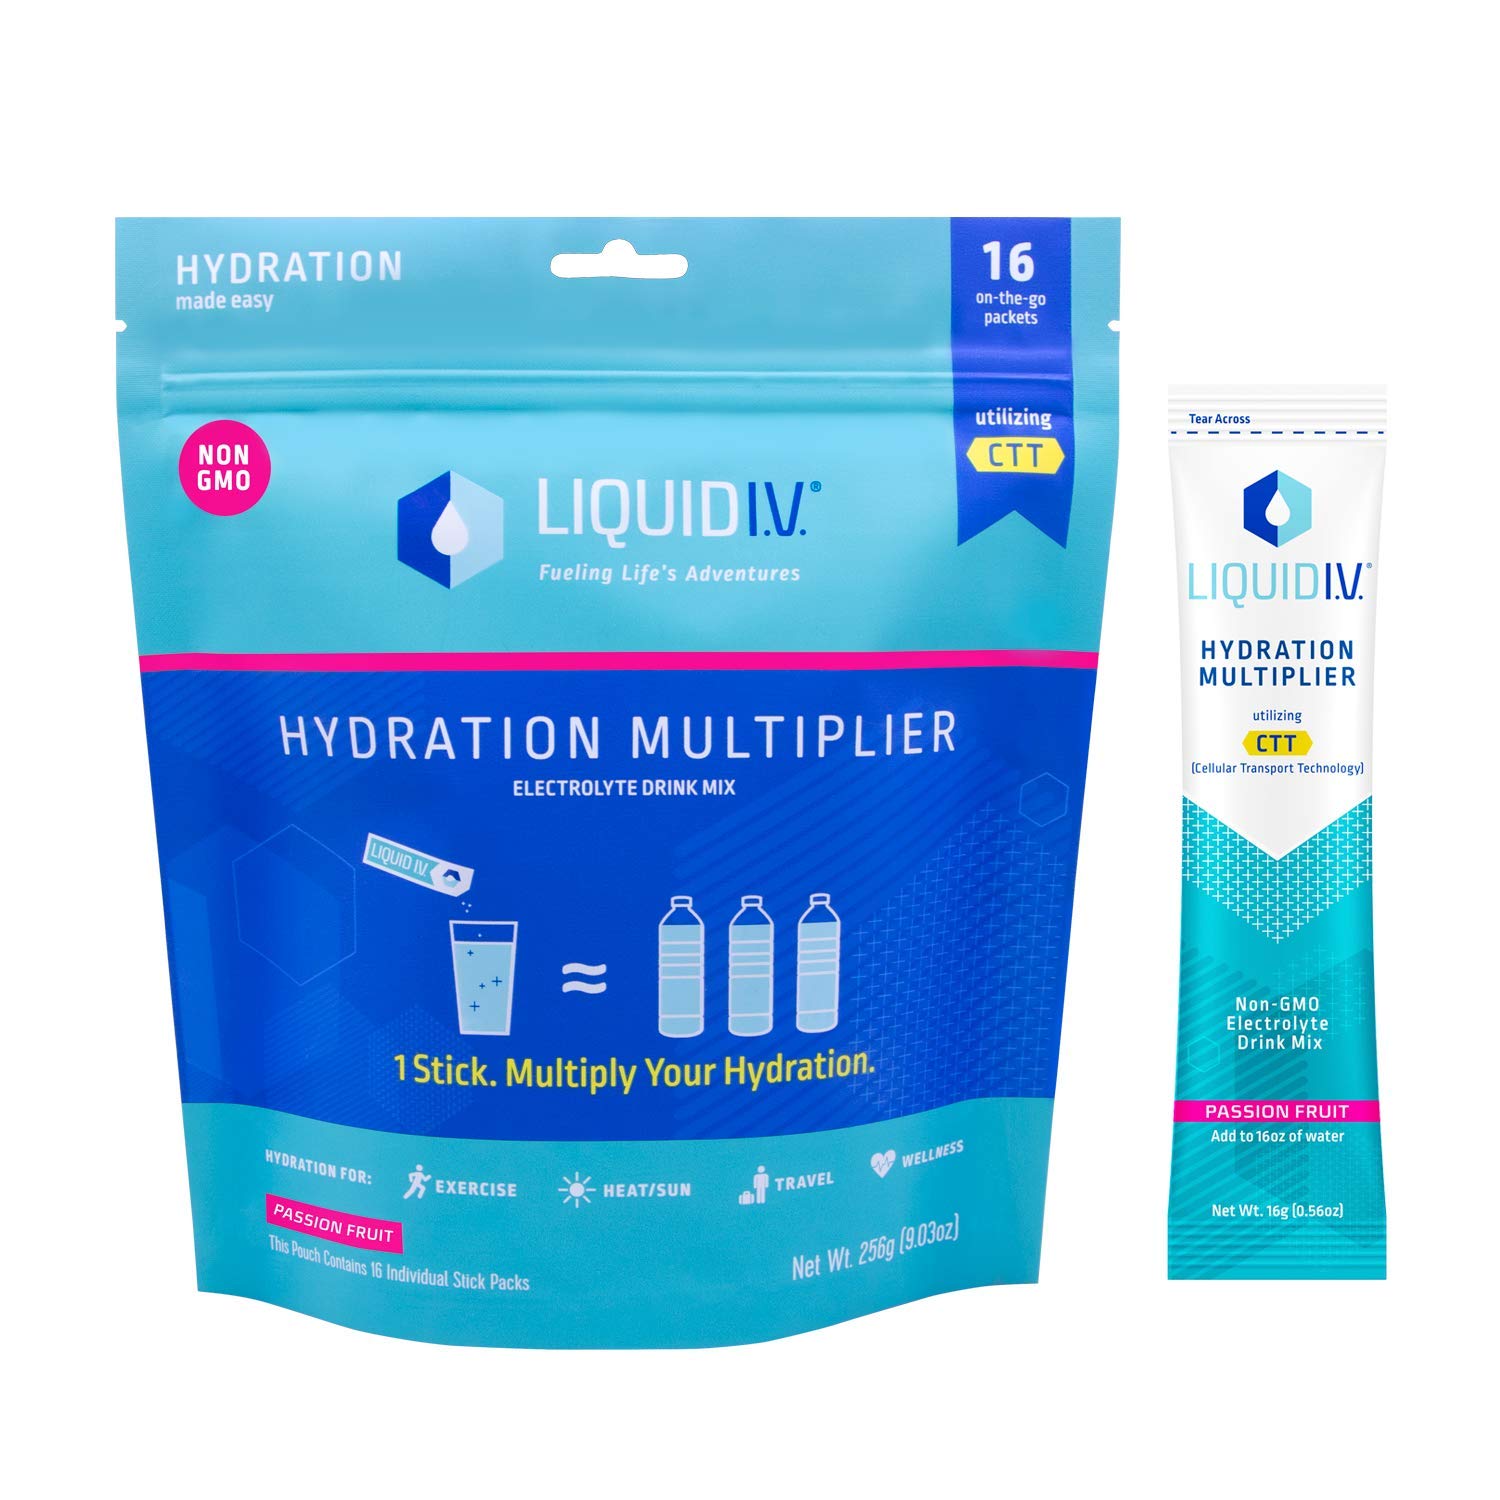 Liquid I.V. Hydration Multiplier, Electrolyte Powder, Easy Open Packets, Supplement Drink Mix (Passion Fruit) (16)